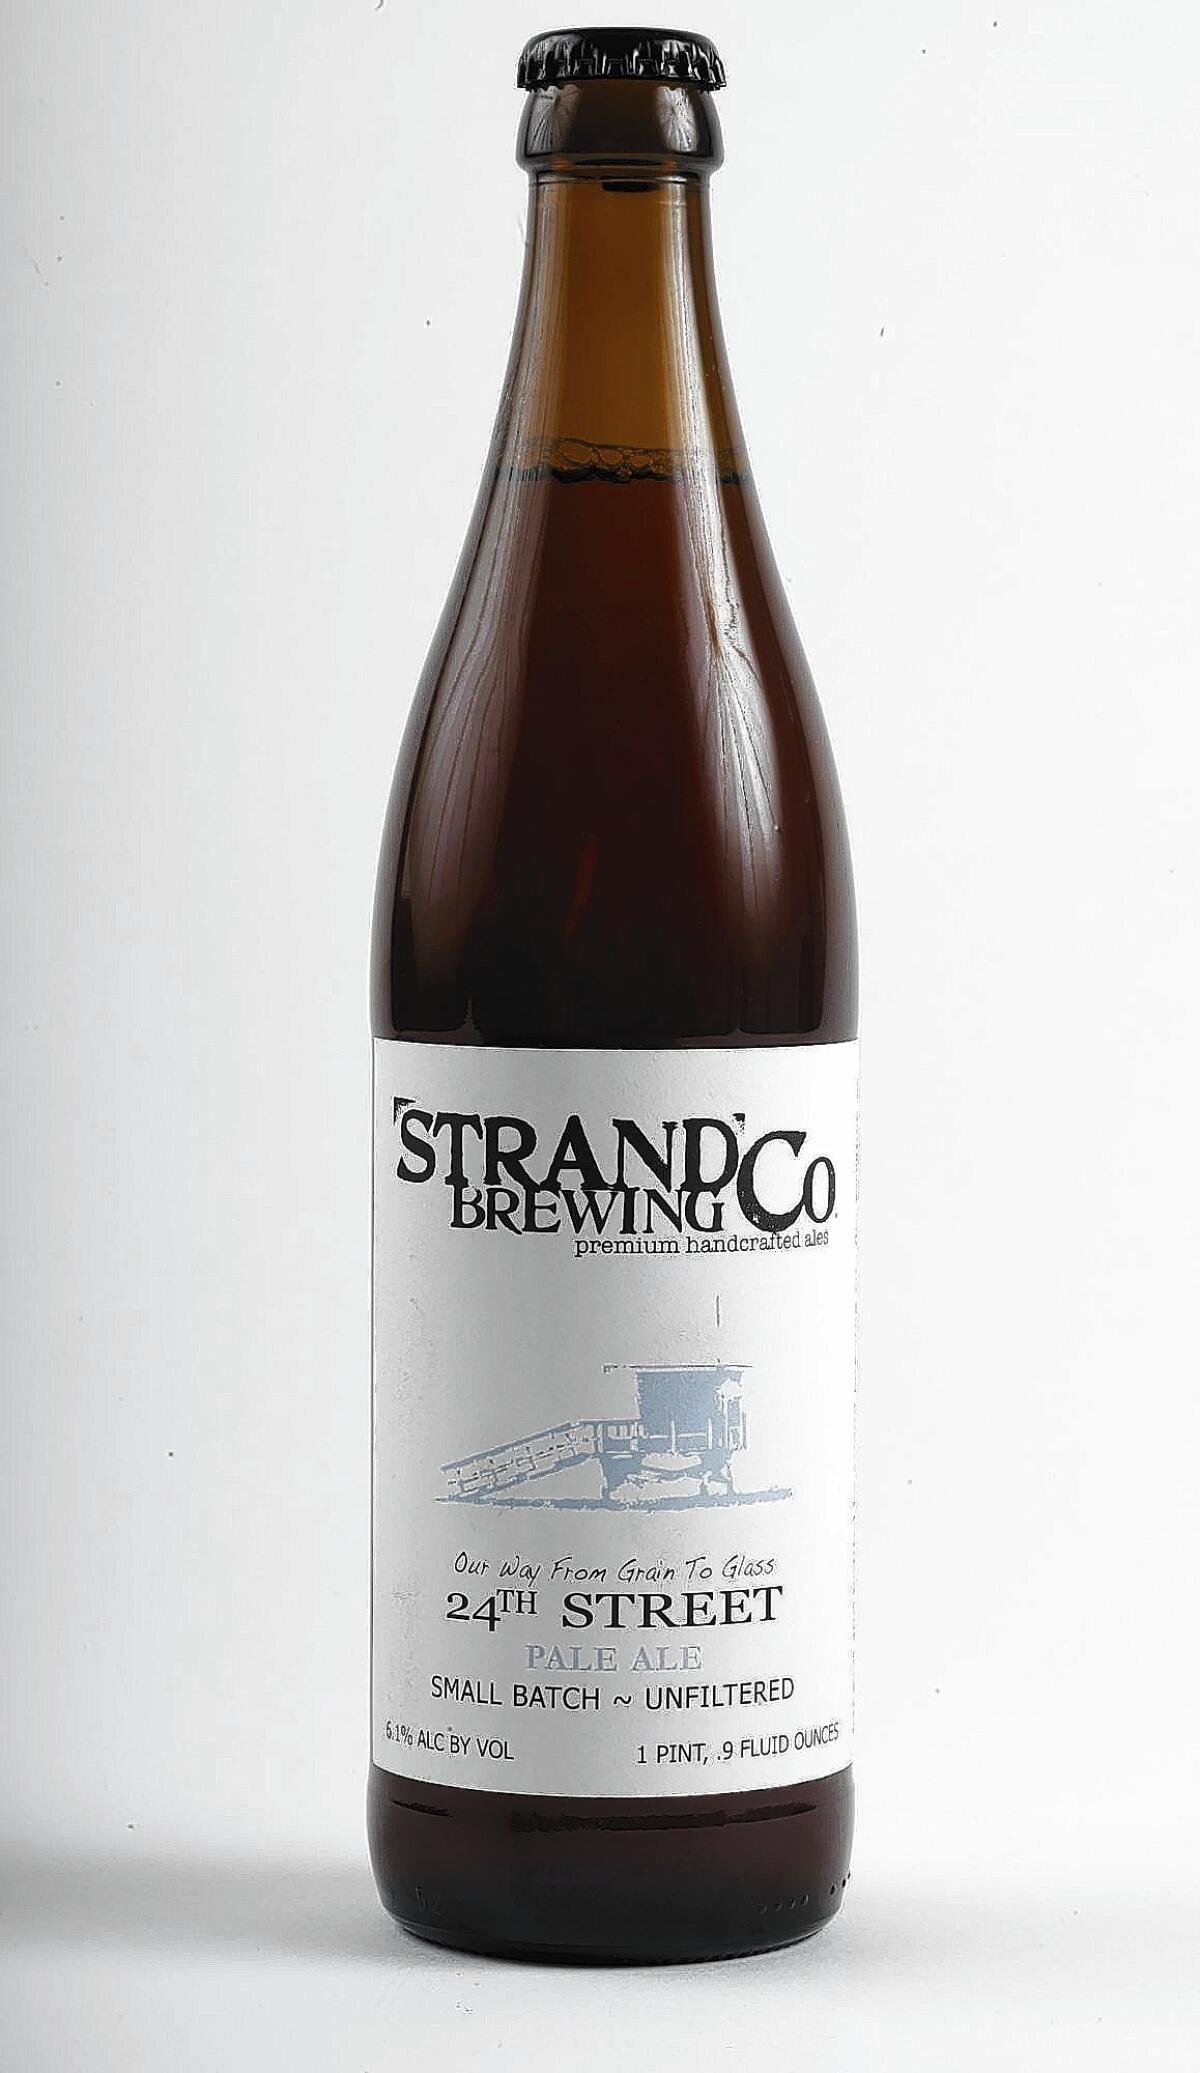 Strand Brewing Co.'s 24th Street pale ale.